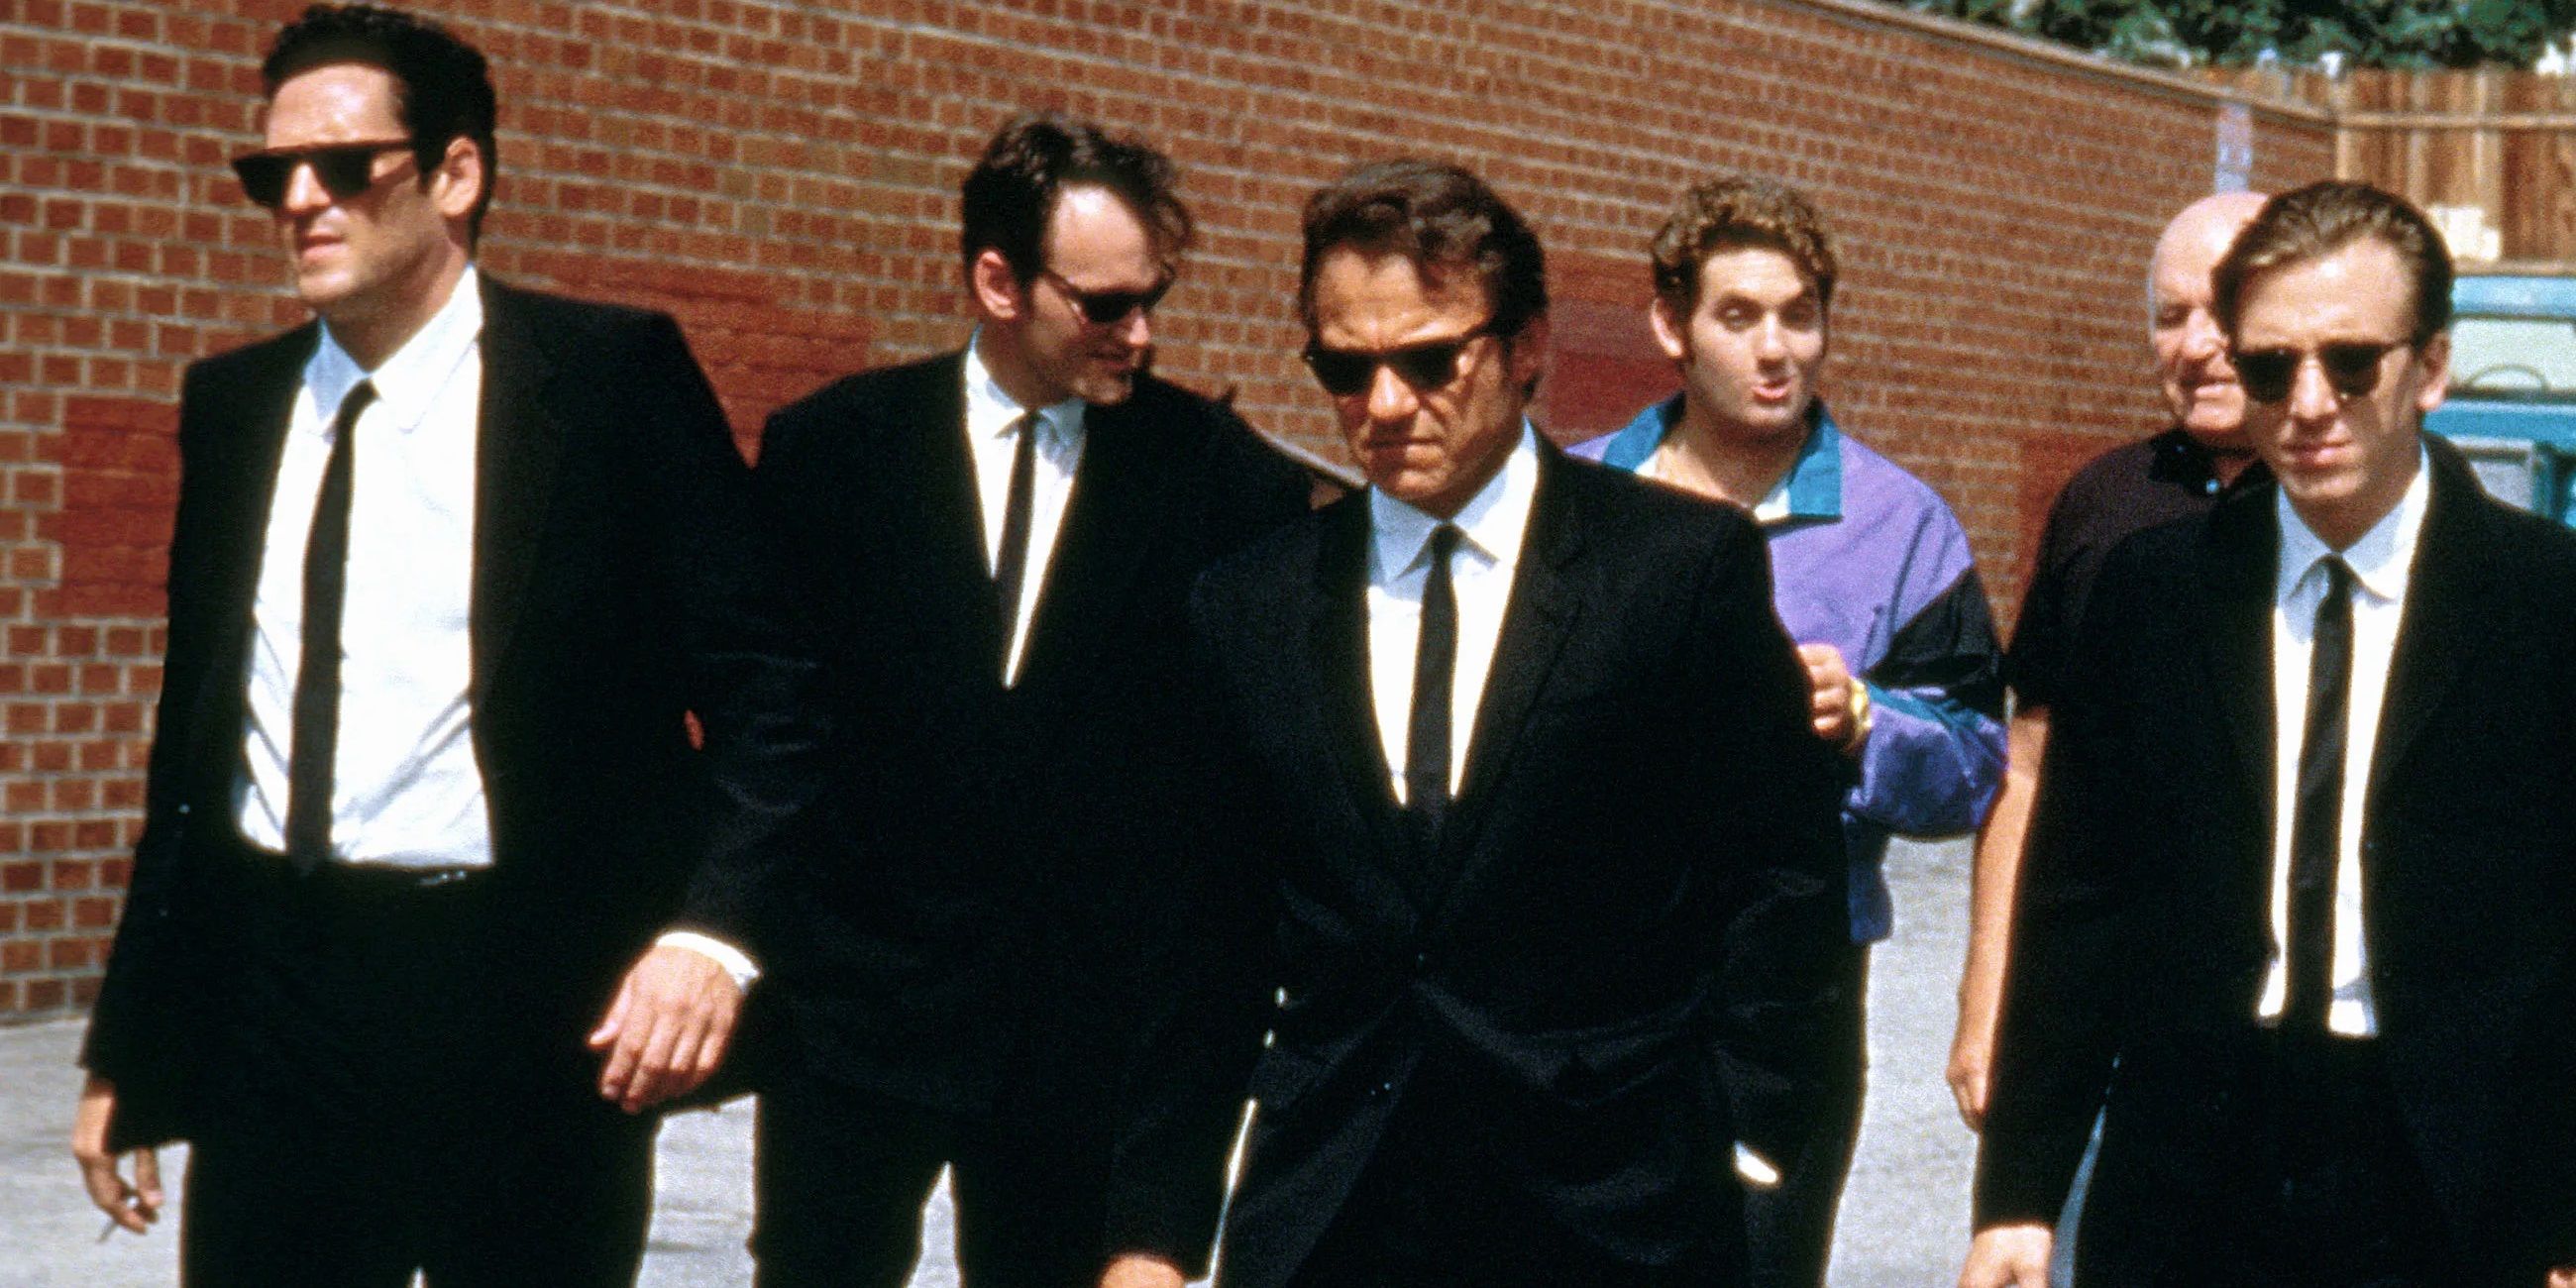 The thieves walk through a parking lot in Reservoir Dogs